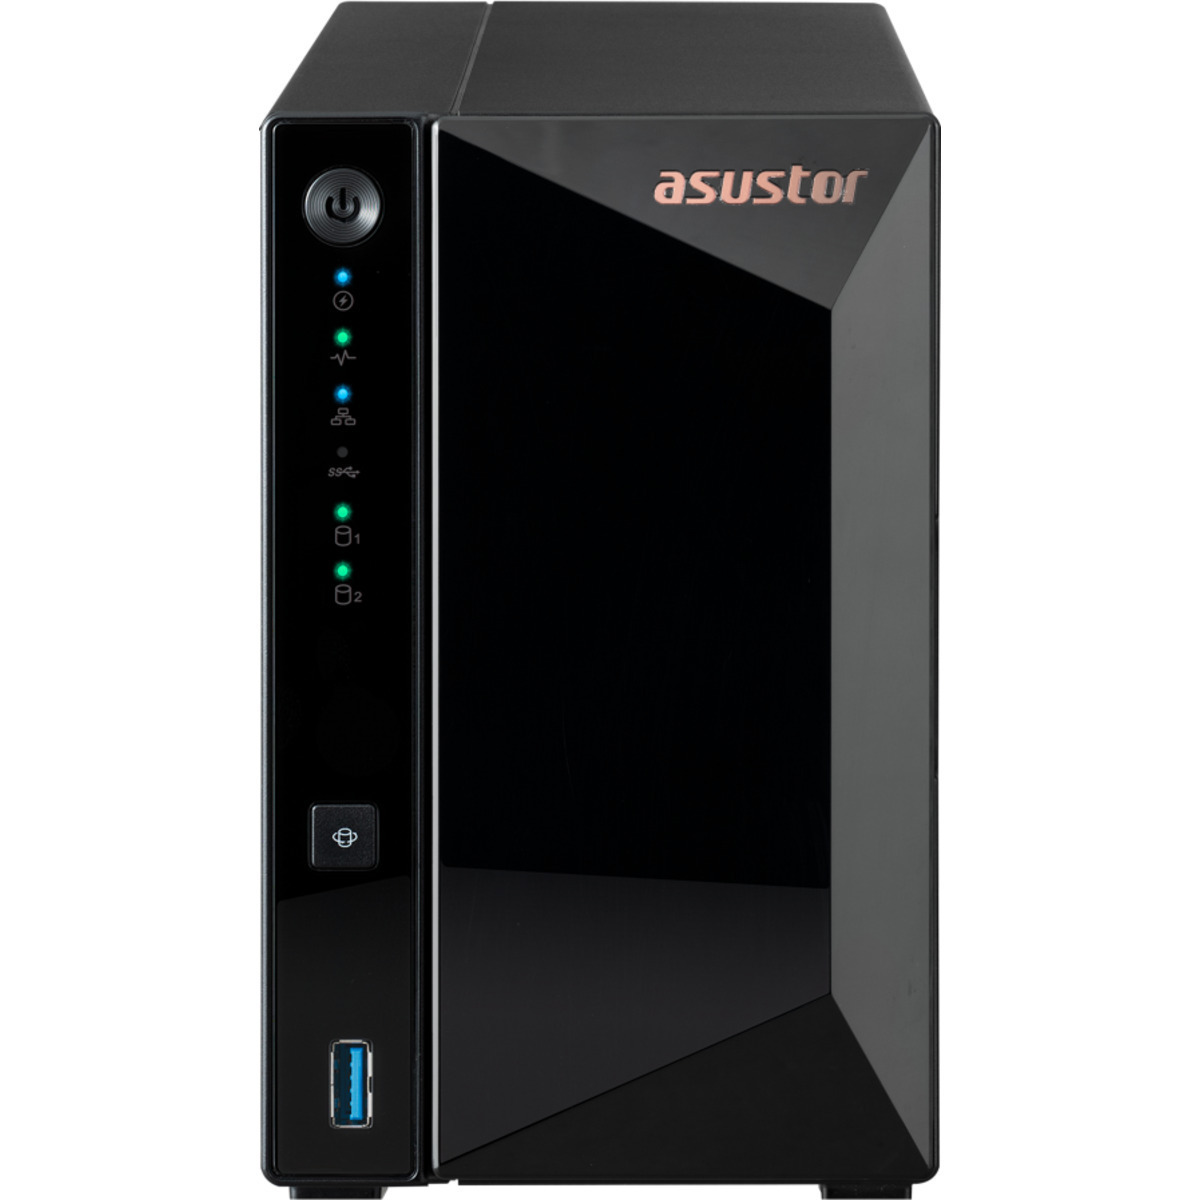 ASUSTOR DRIVESTOR 2 Pro Gen2 AS3302T v2 24tb 2-Bay Desktop Personal / Basic Home / Small Office NAS - Network Attached Storage Device 2x12tb Western Digital Ultrastar DC HC520 HUH721212ALE600 3.5 7200rpm SATA 6Gb/s HDD ENTERPRISE Class Drives Installed - Burn-In Tested - ON SALE DRIVESTOR 2 Pro Gen2 AS3302T v2